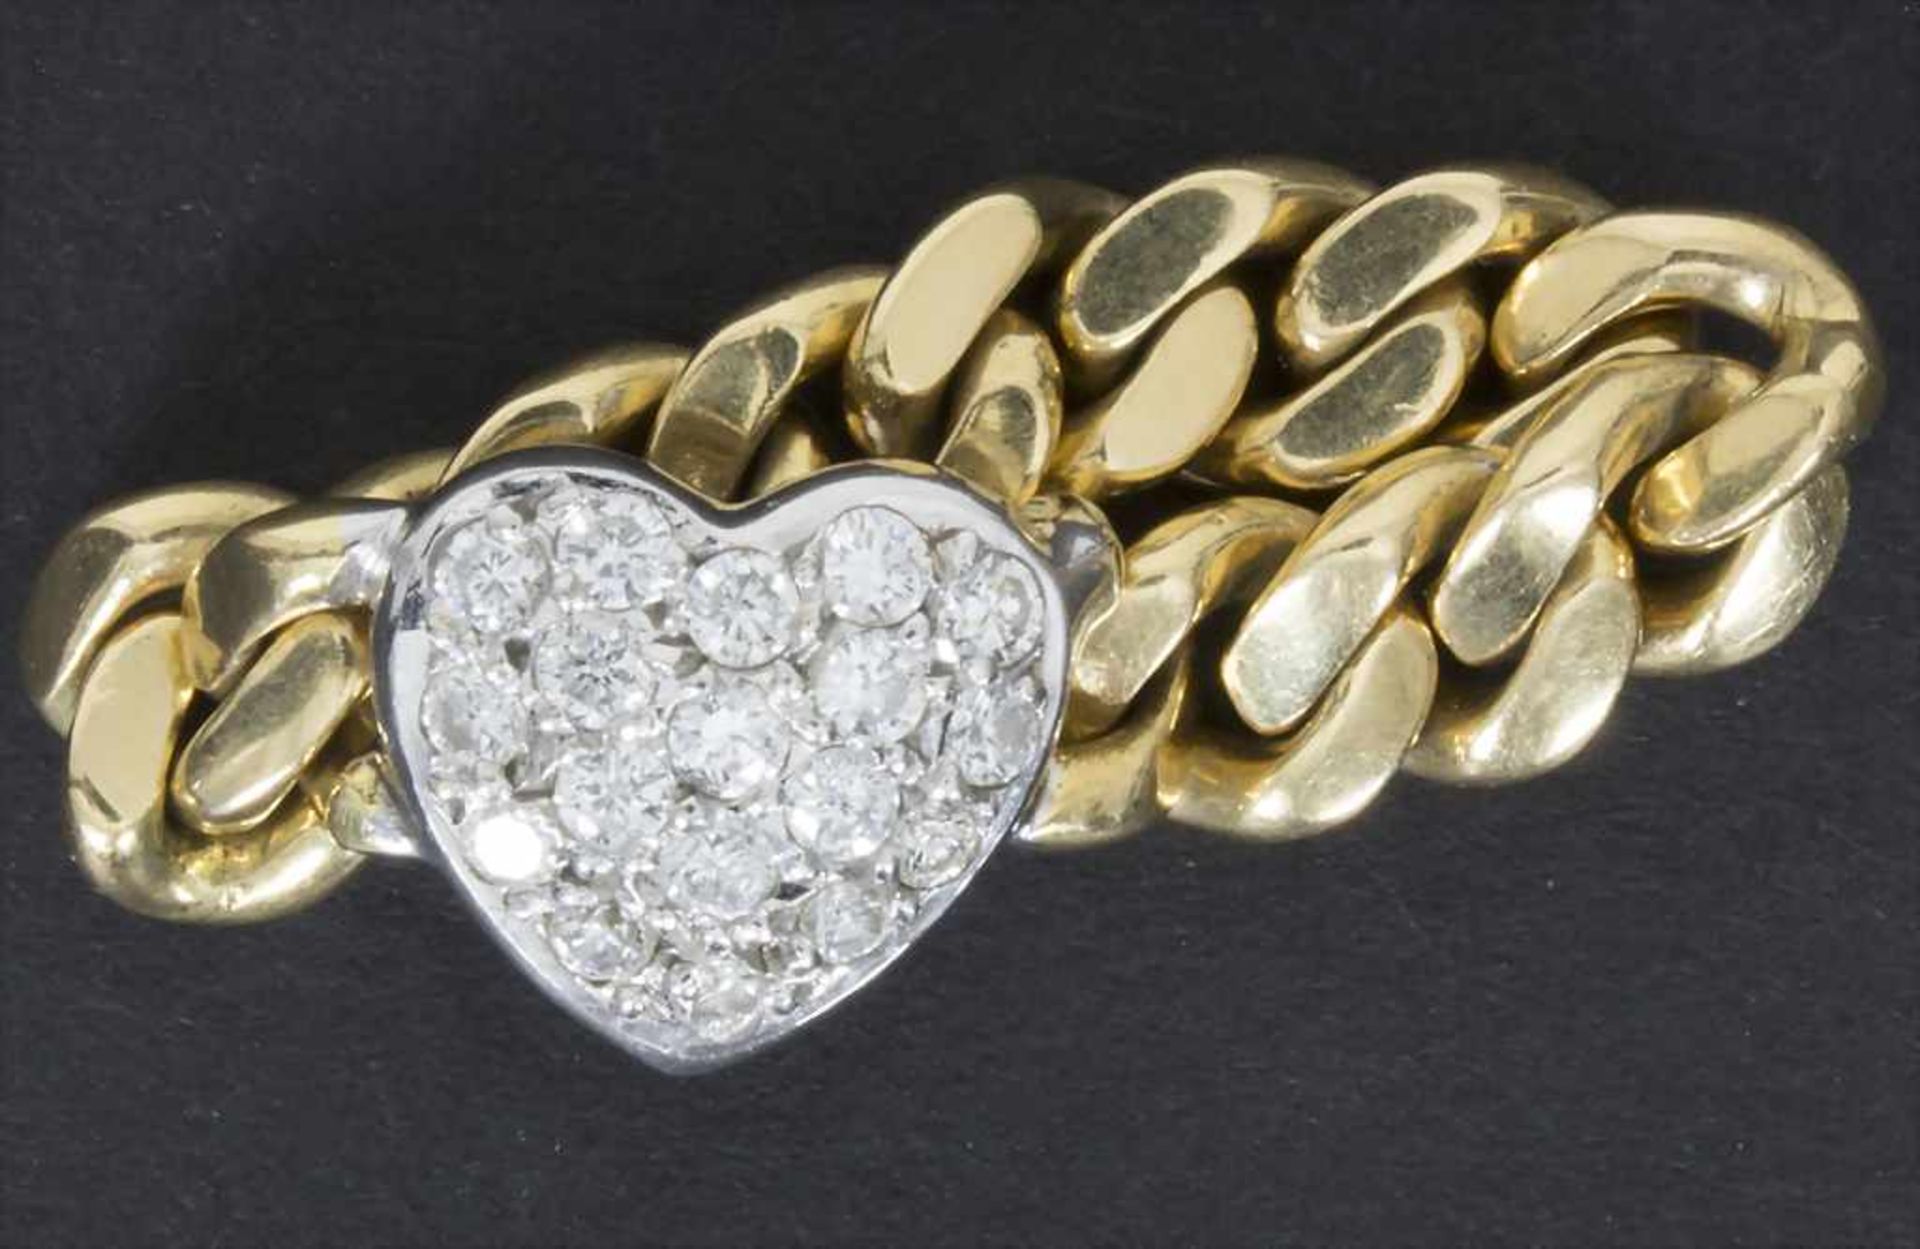 Kettenring mit Brillanten in Herzform / A Ladies Ring with BrilliantsMaterial: GG 750/000, - Image 3 of 3